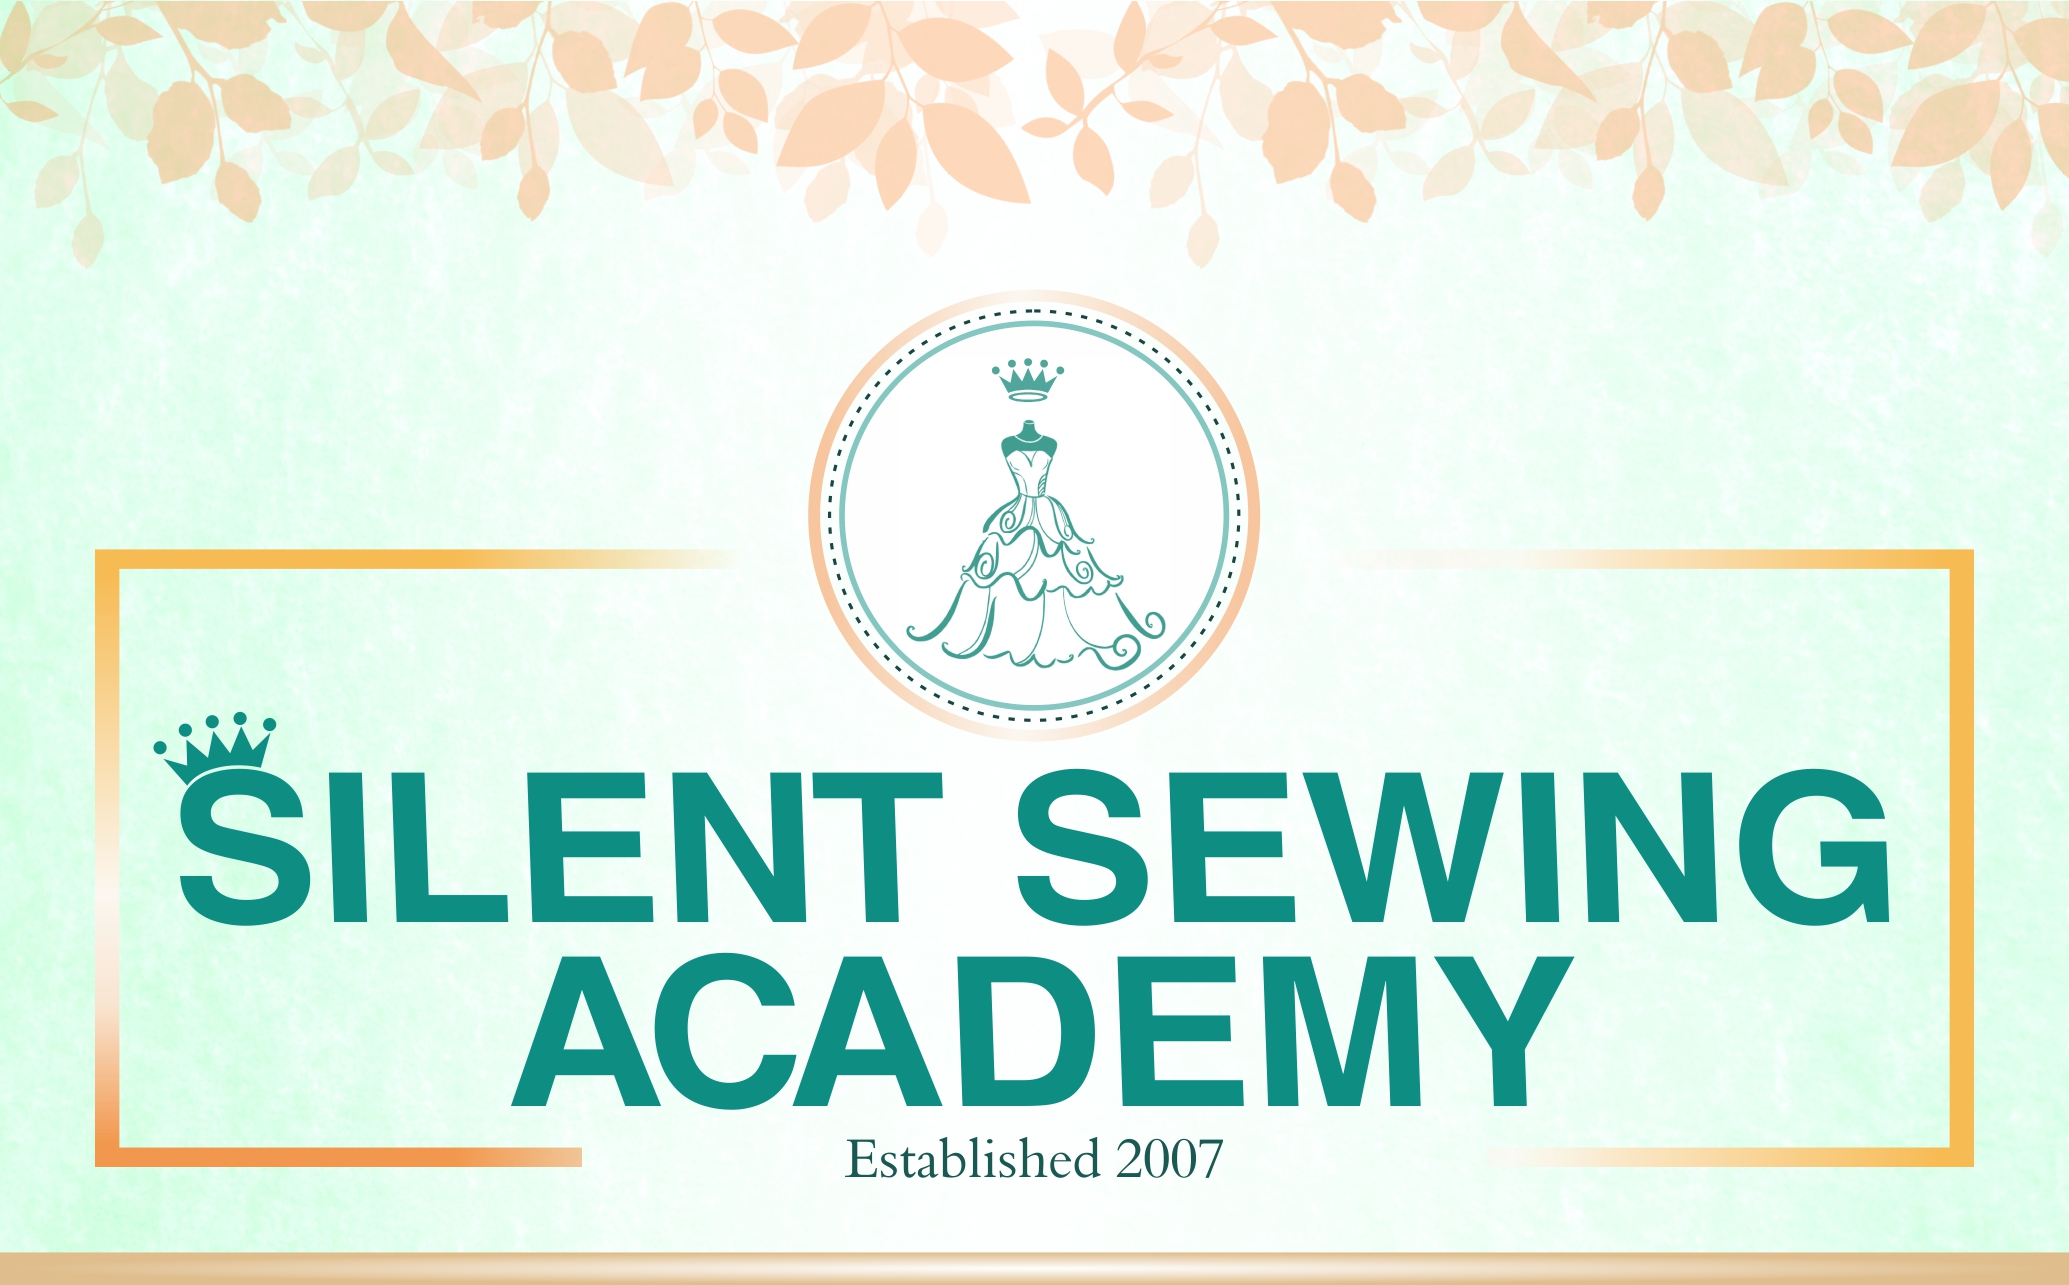 Silent Sewing Academy